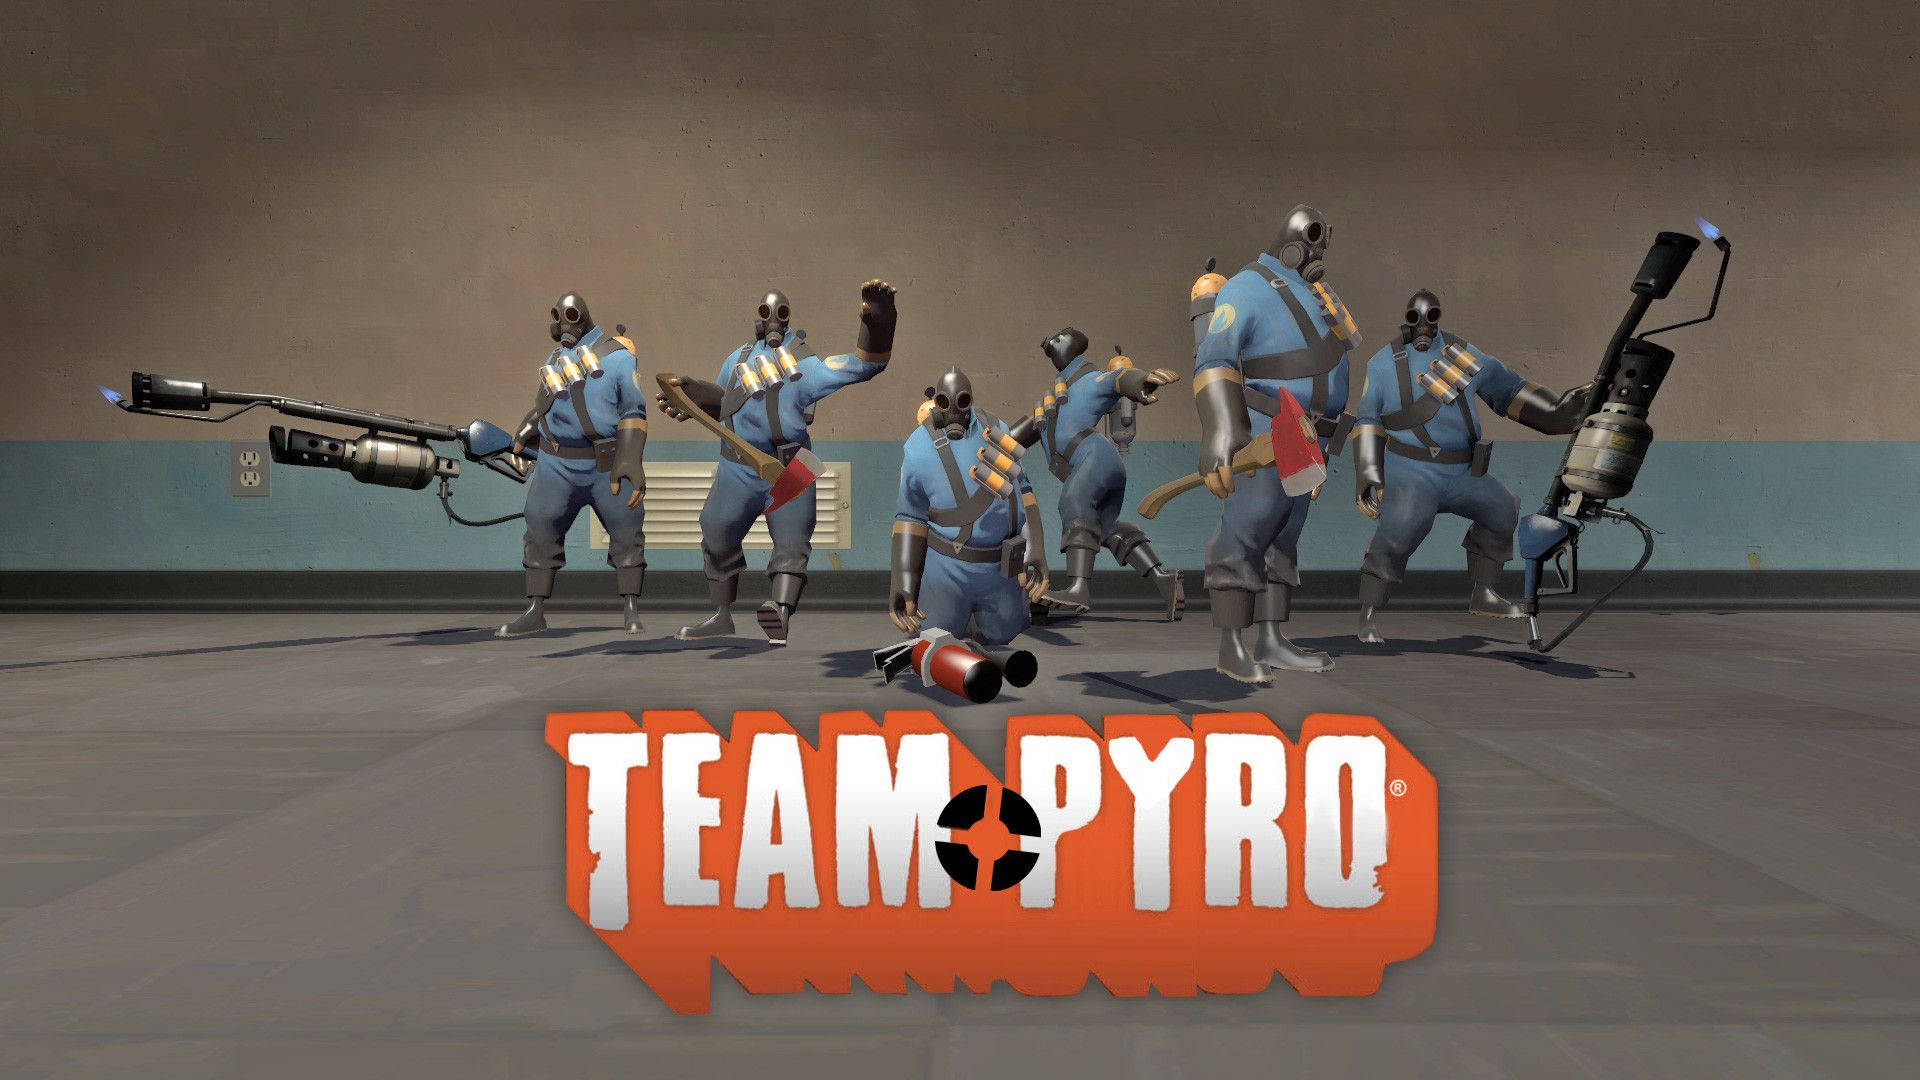 Pyro, the blazing character from Team Fortress 2. Wallpaper